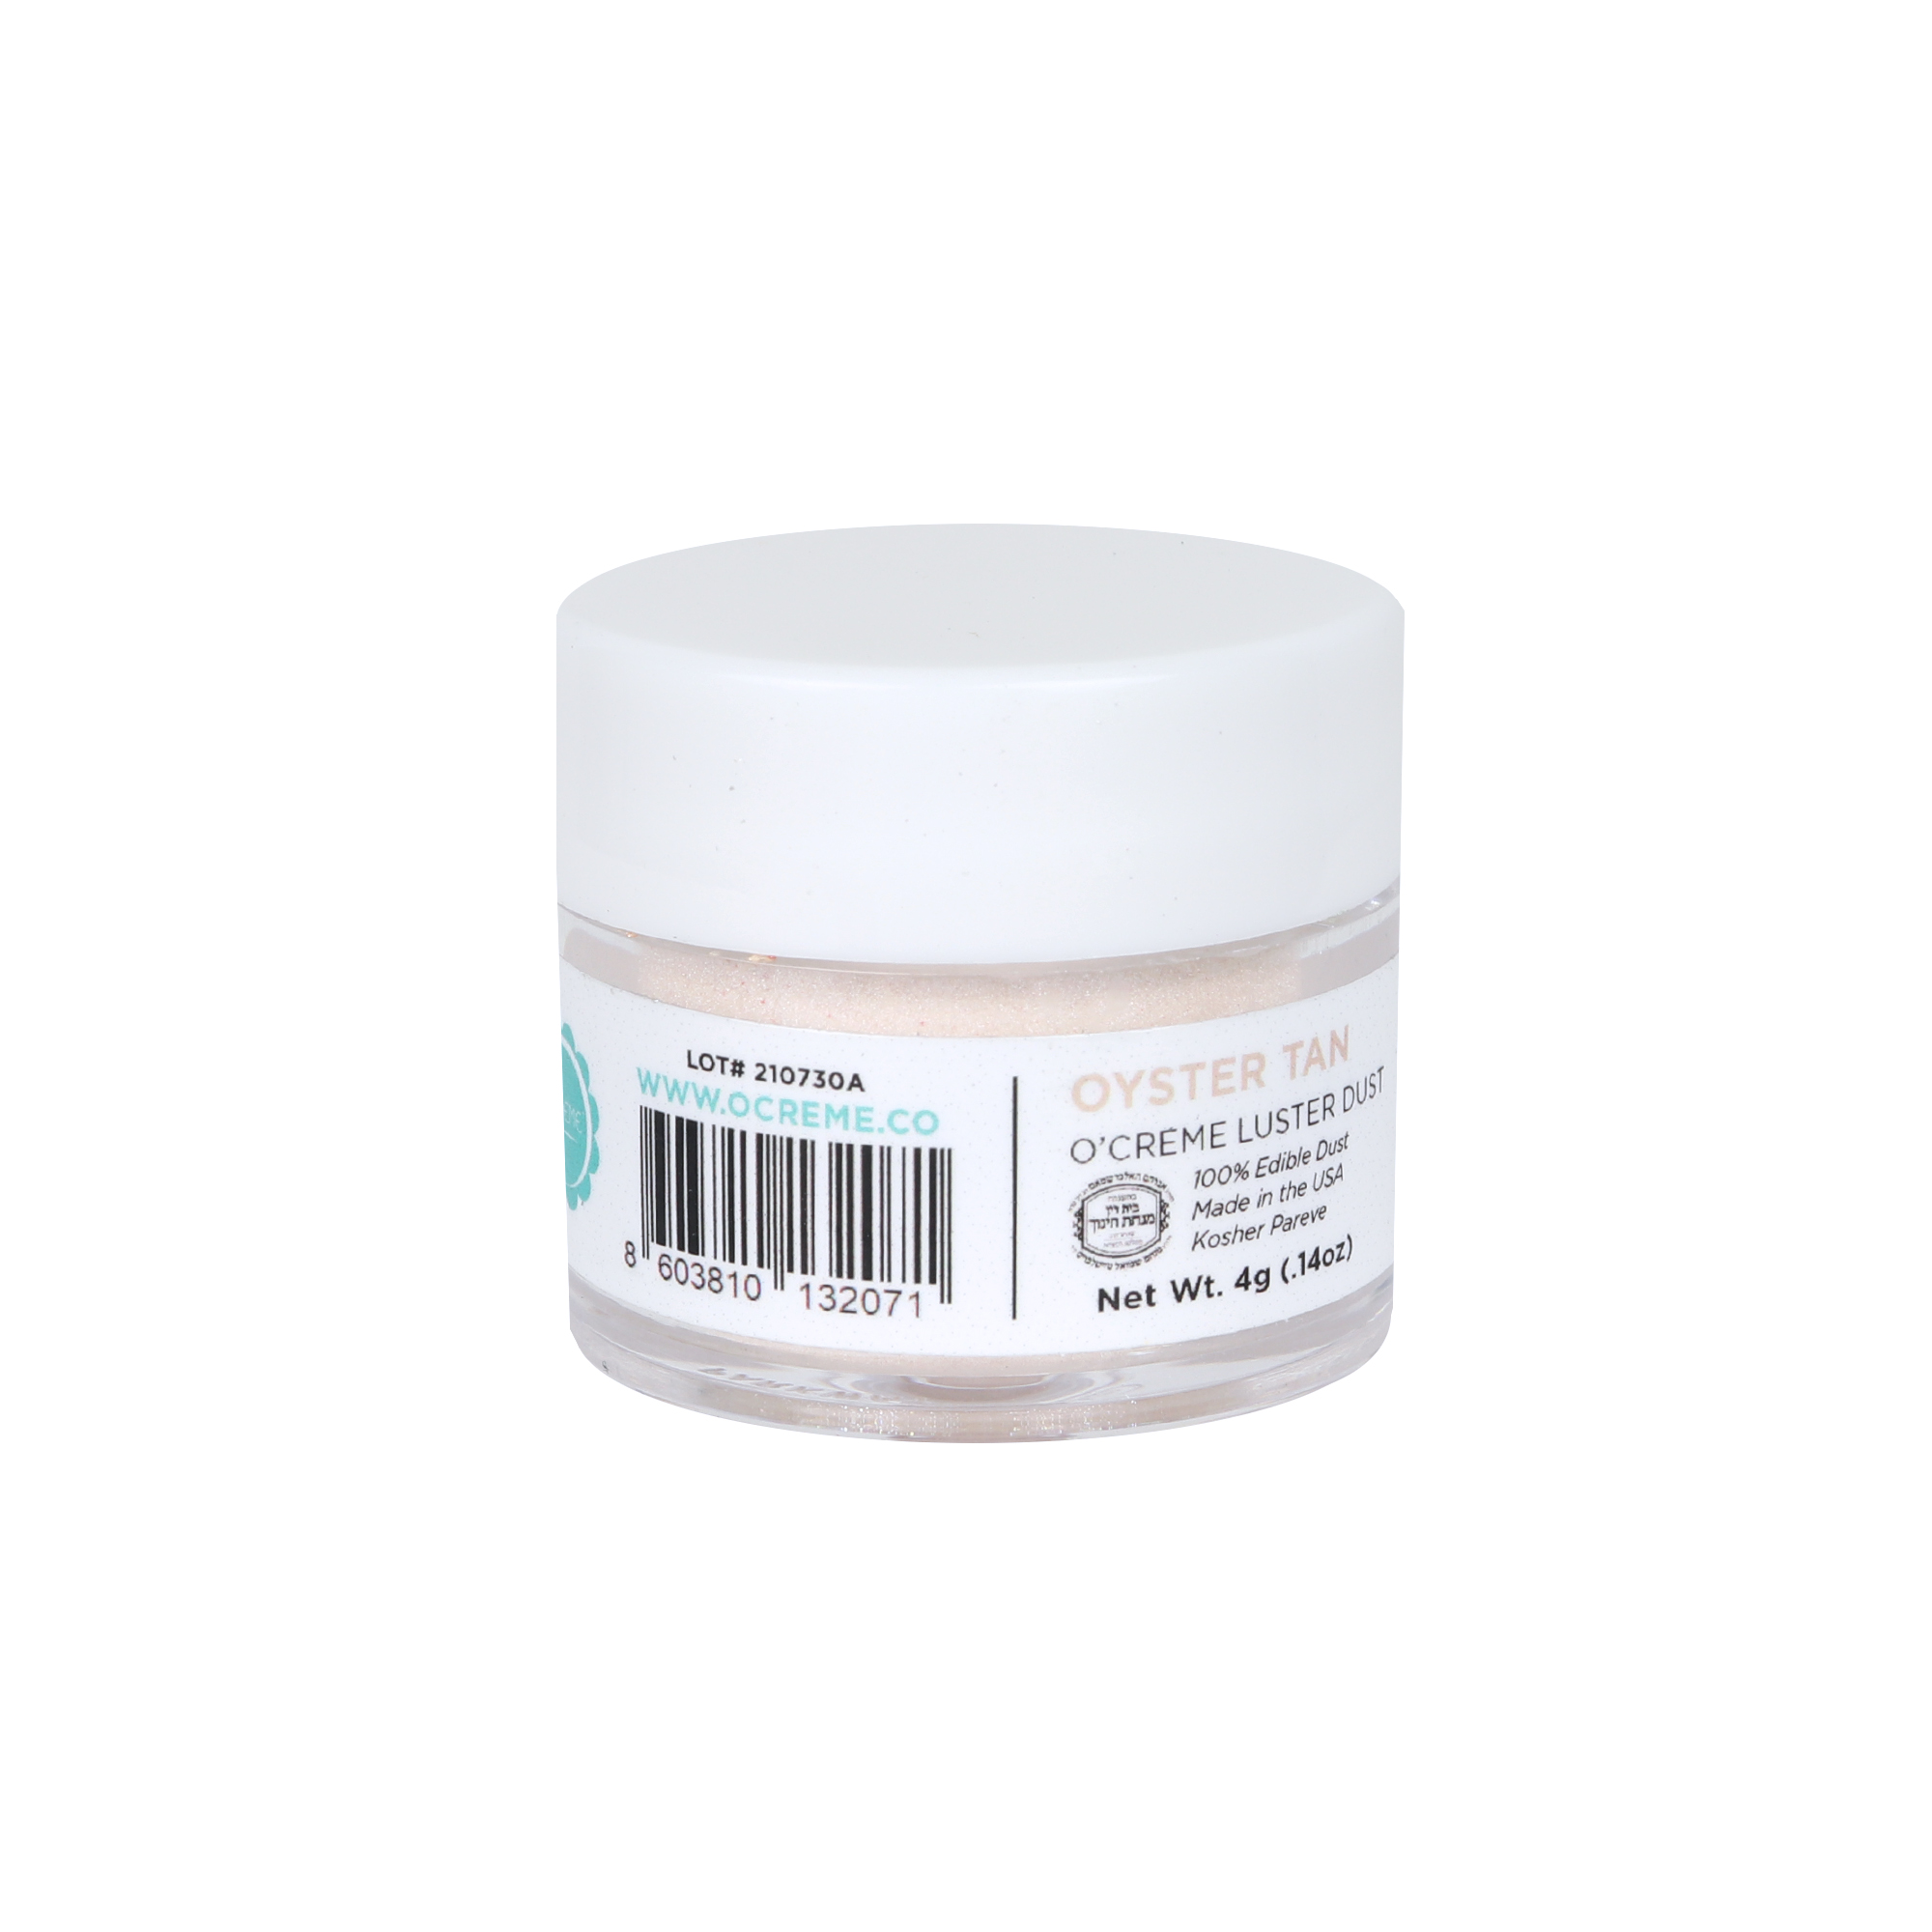 O'Creme Oyster Tan Luster Dust, 4 gr. image 1